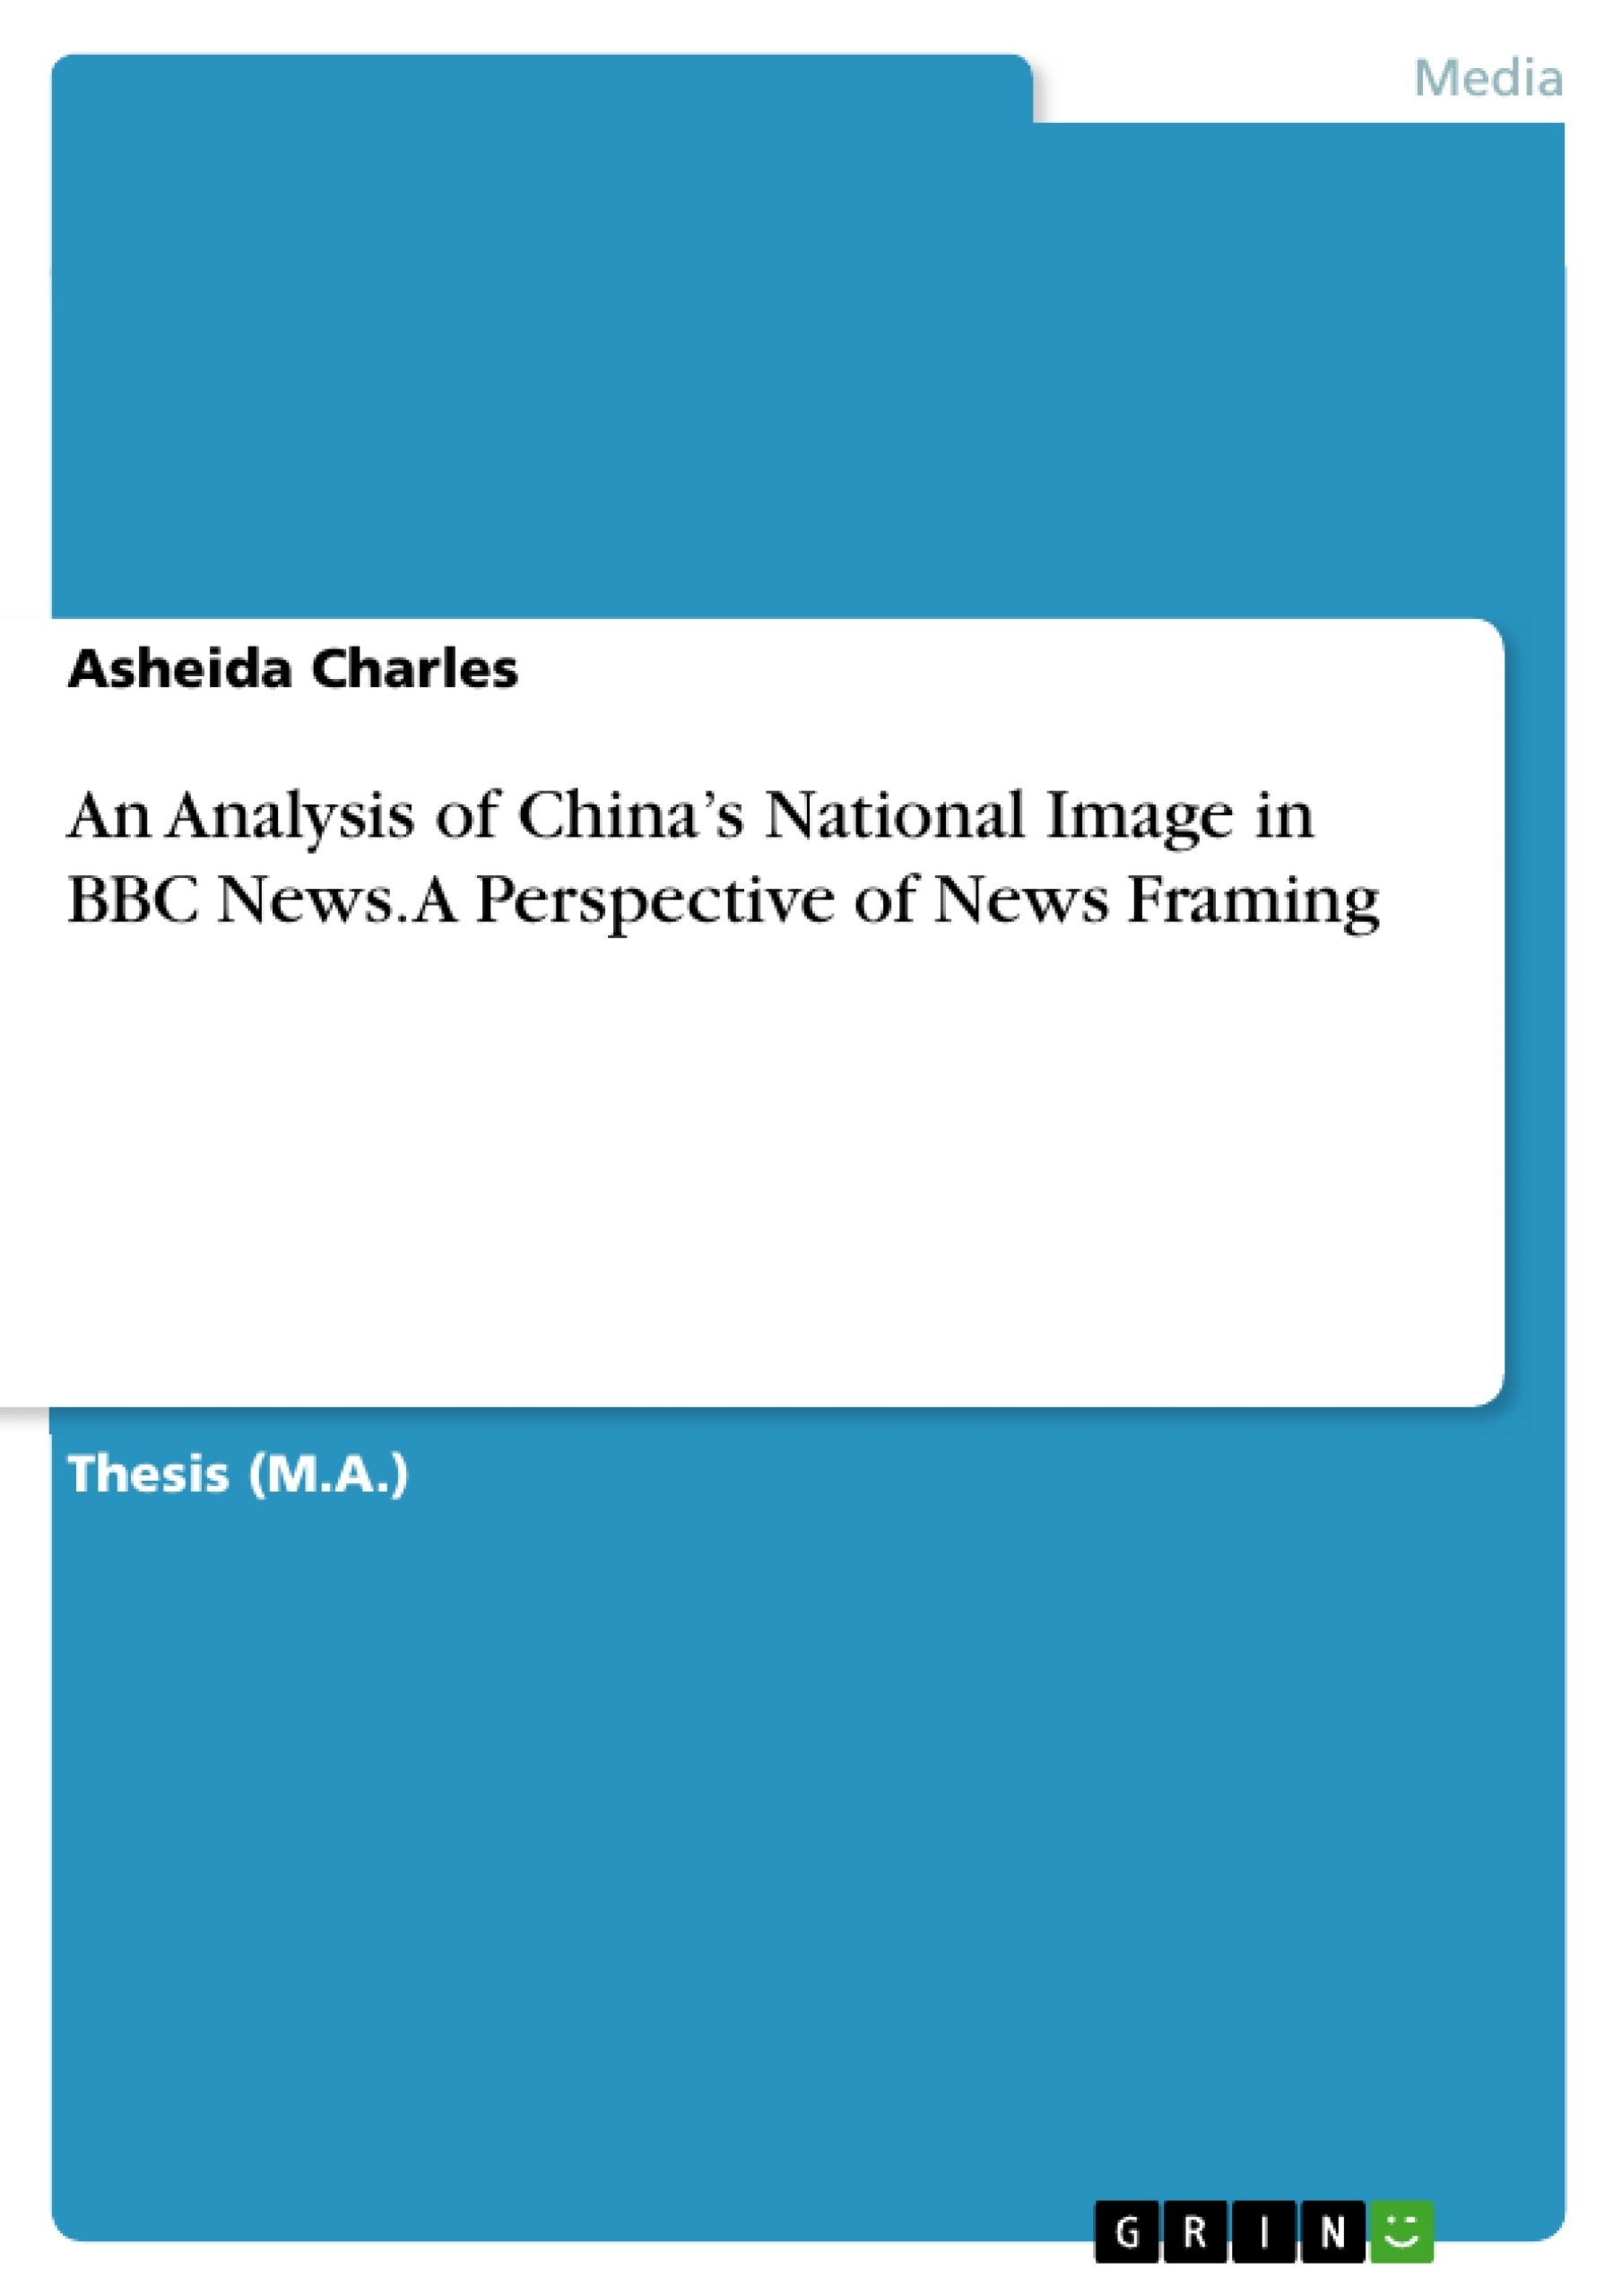 Título: An Analysis of China’s National Image in BBC News. A Perspective of News Framing